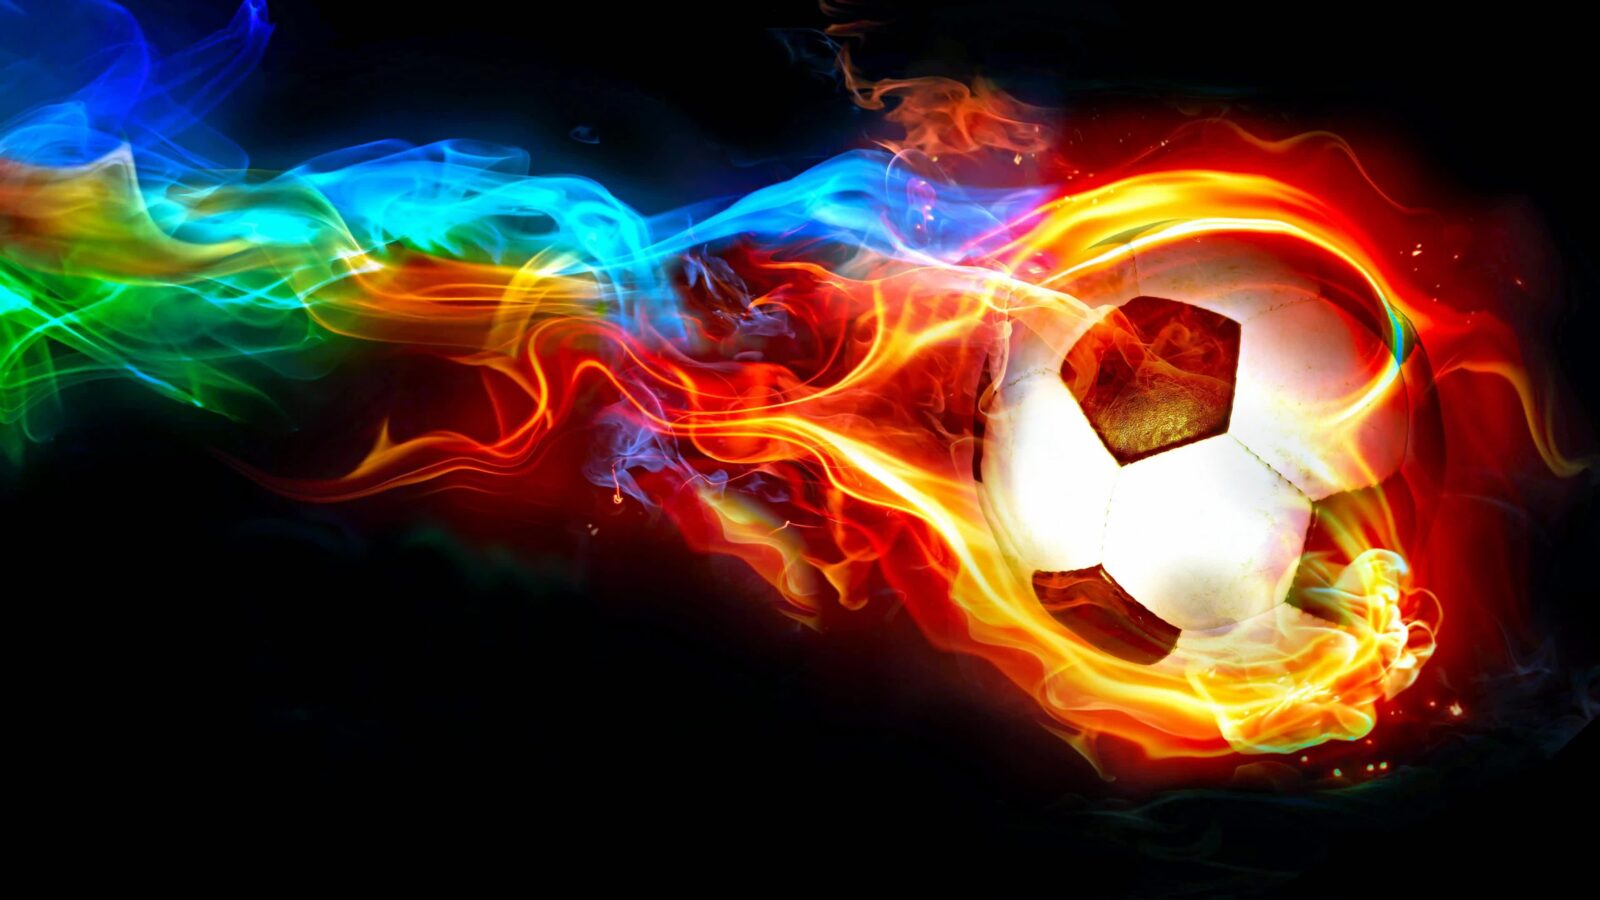 LiveWallpapers4Free.com | Fifa Football Artwork Abstract 4K Quality - Free Live Wallpaper